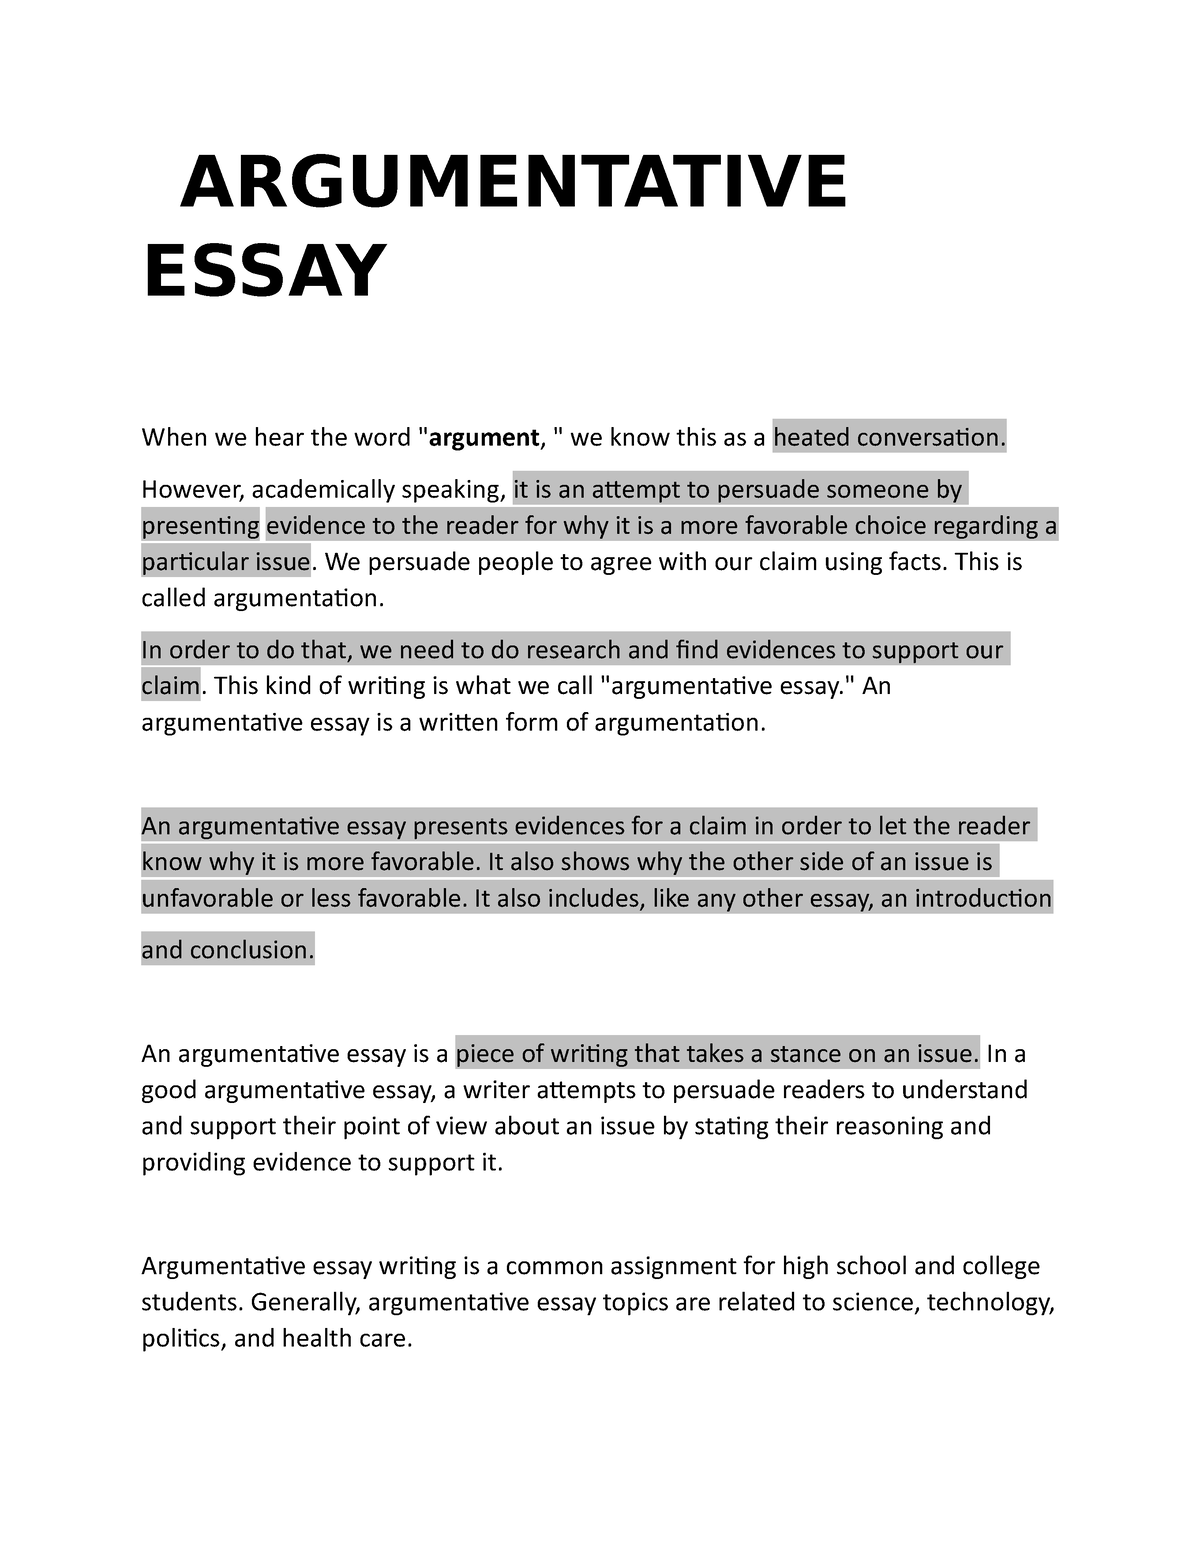 example of argumentative essay with introduction body and conclusion brainly